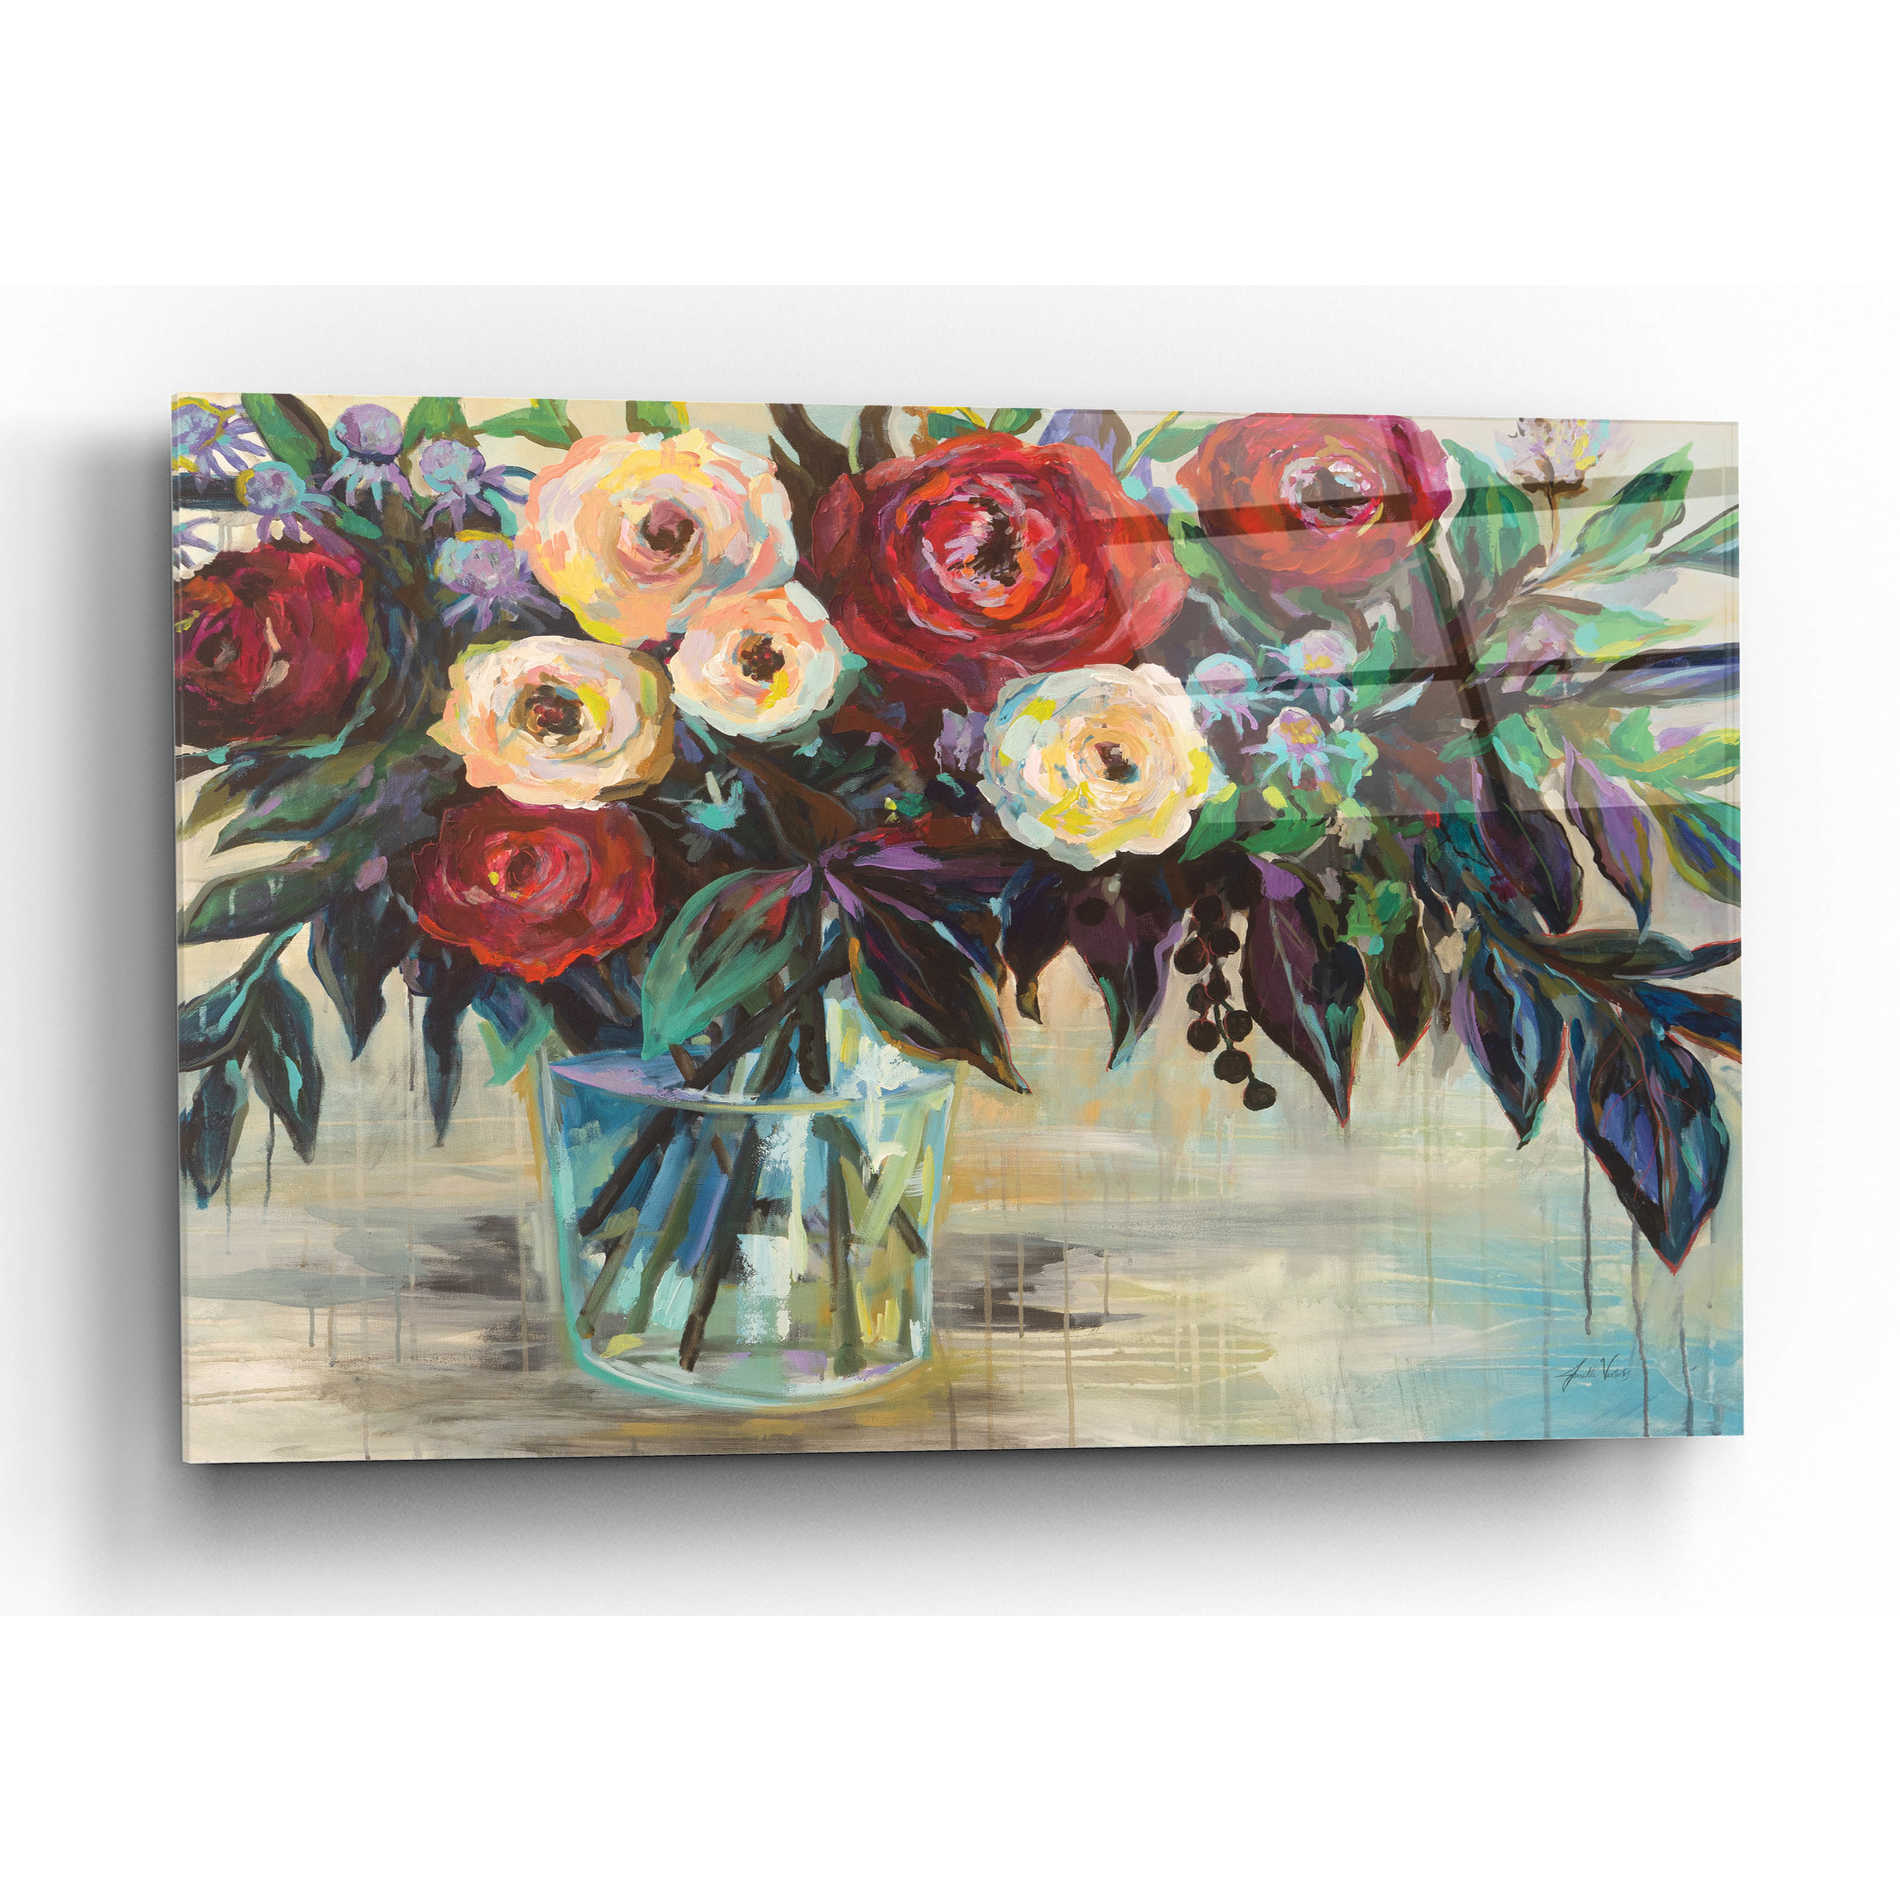 Epic Art 'Winter Floral Crop' by Jeanette Vertentes, Acrylic Glass Wall Art,16x12